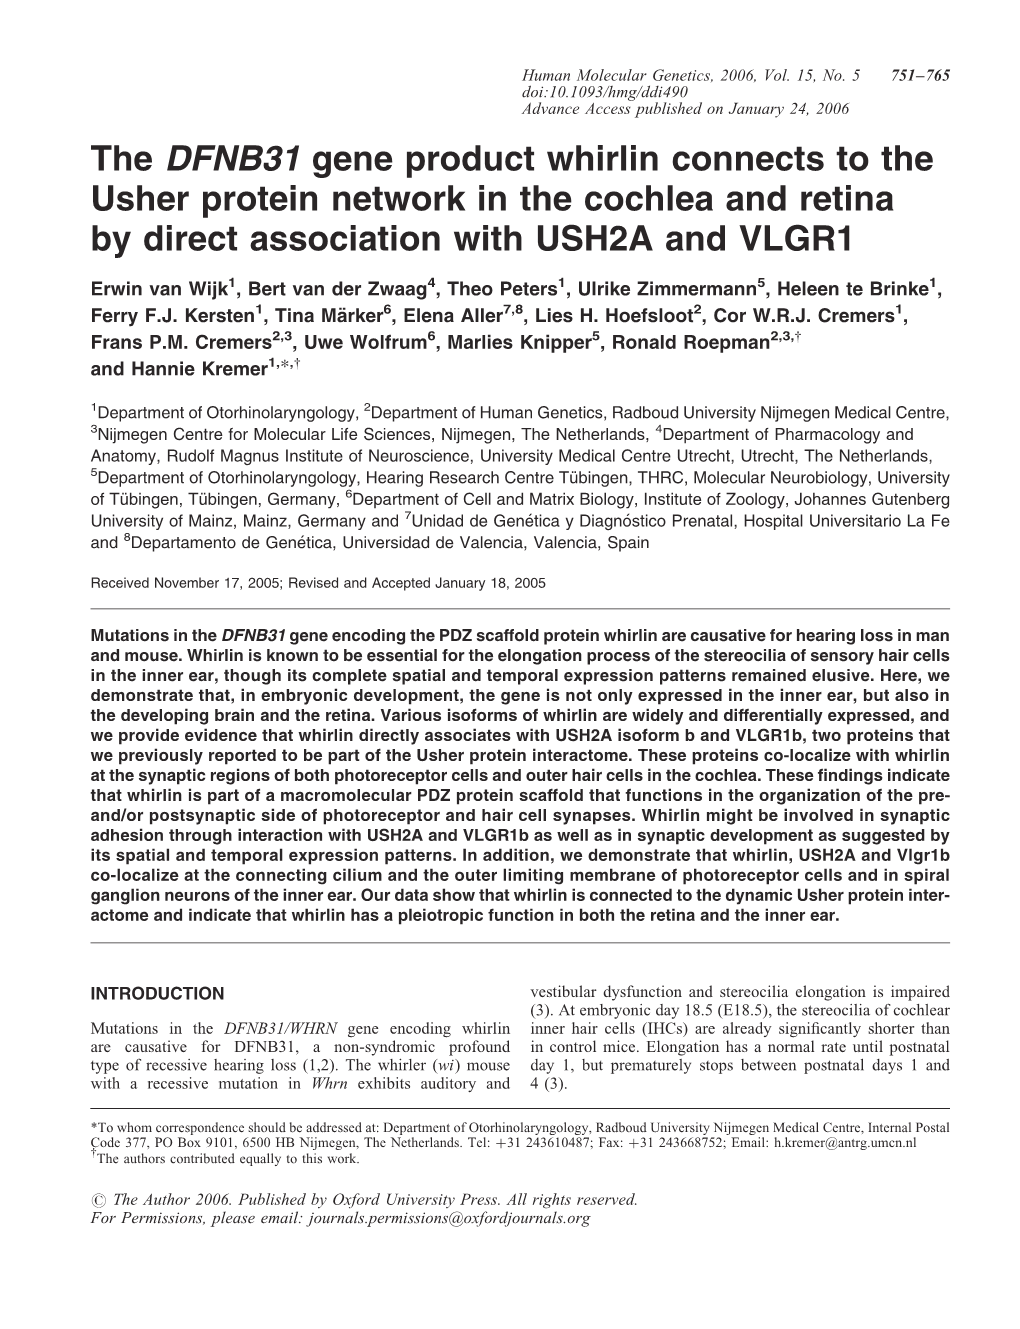 The DFNB31 Gene Product Whirlin Connects to the Usher Protein Network in the Cochlea and Retina by Direct Association with USH2A and VLGR1